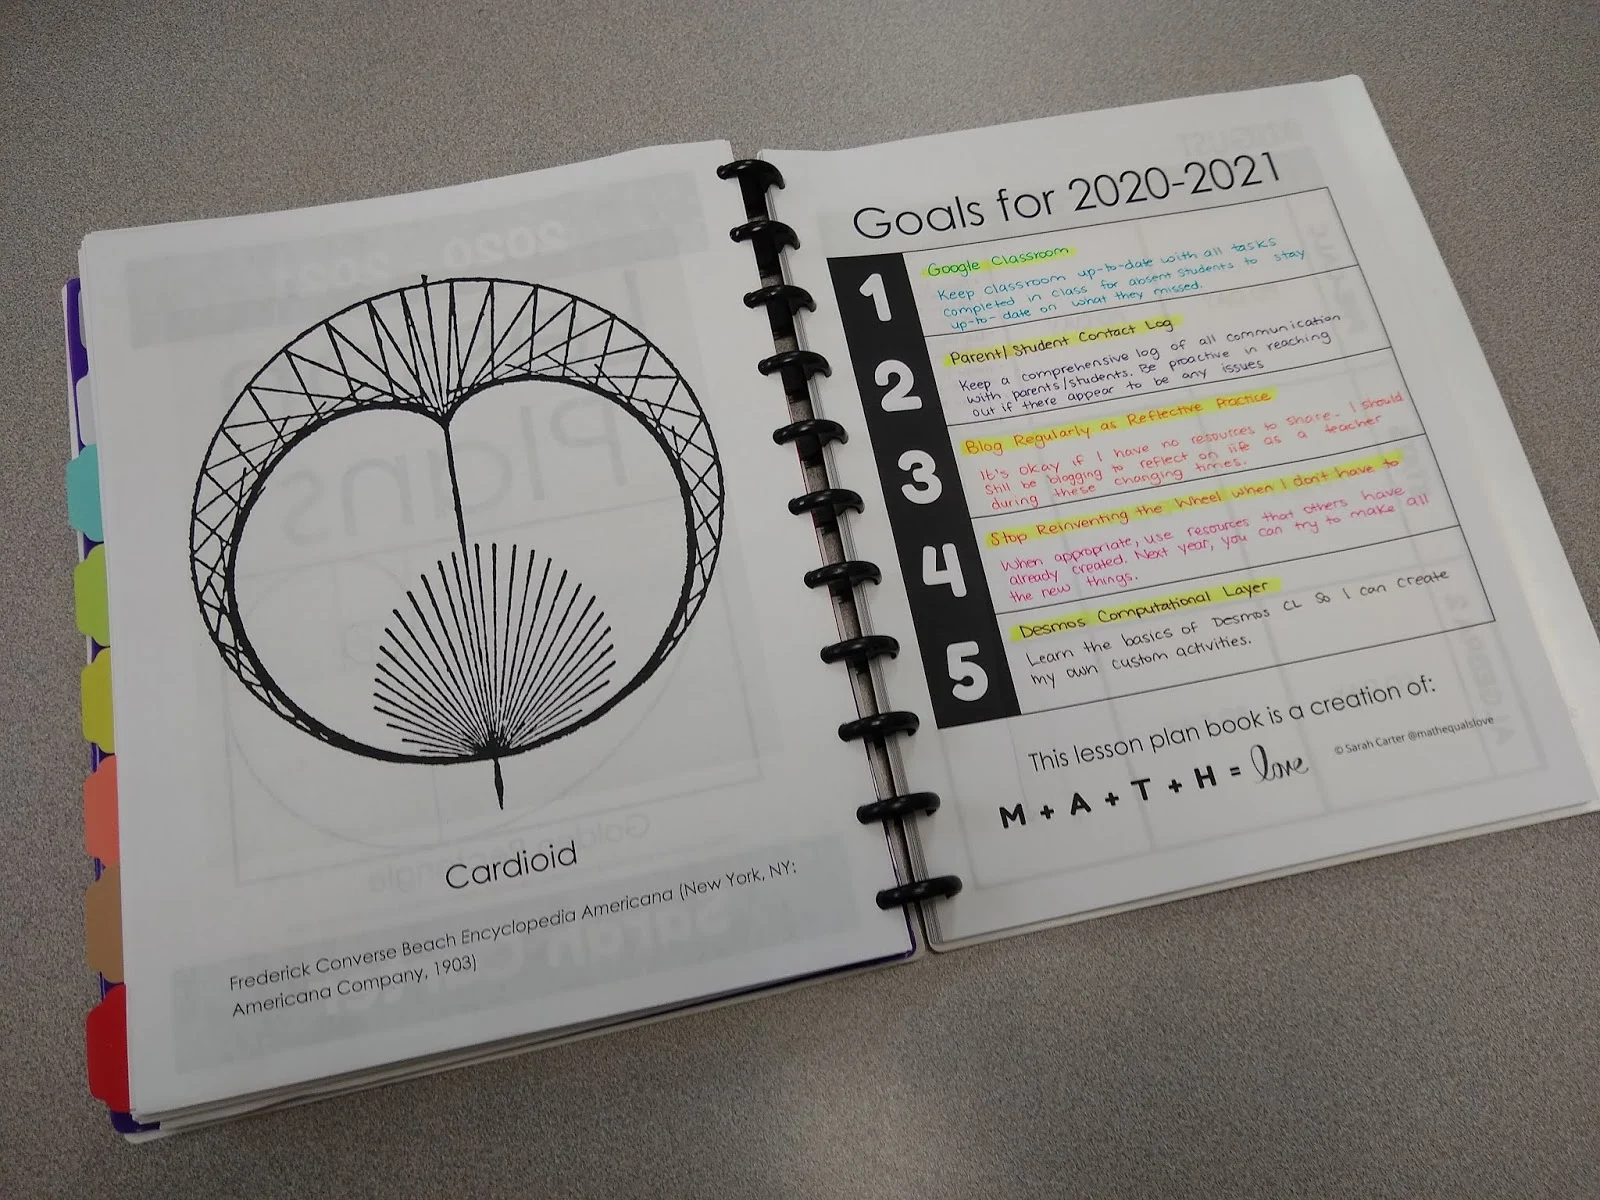 goals for the 2020-2021 school year page in teacher lesson plan book